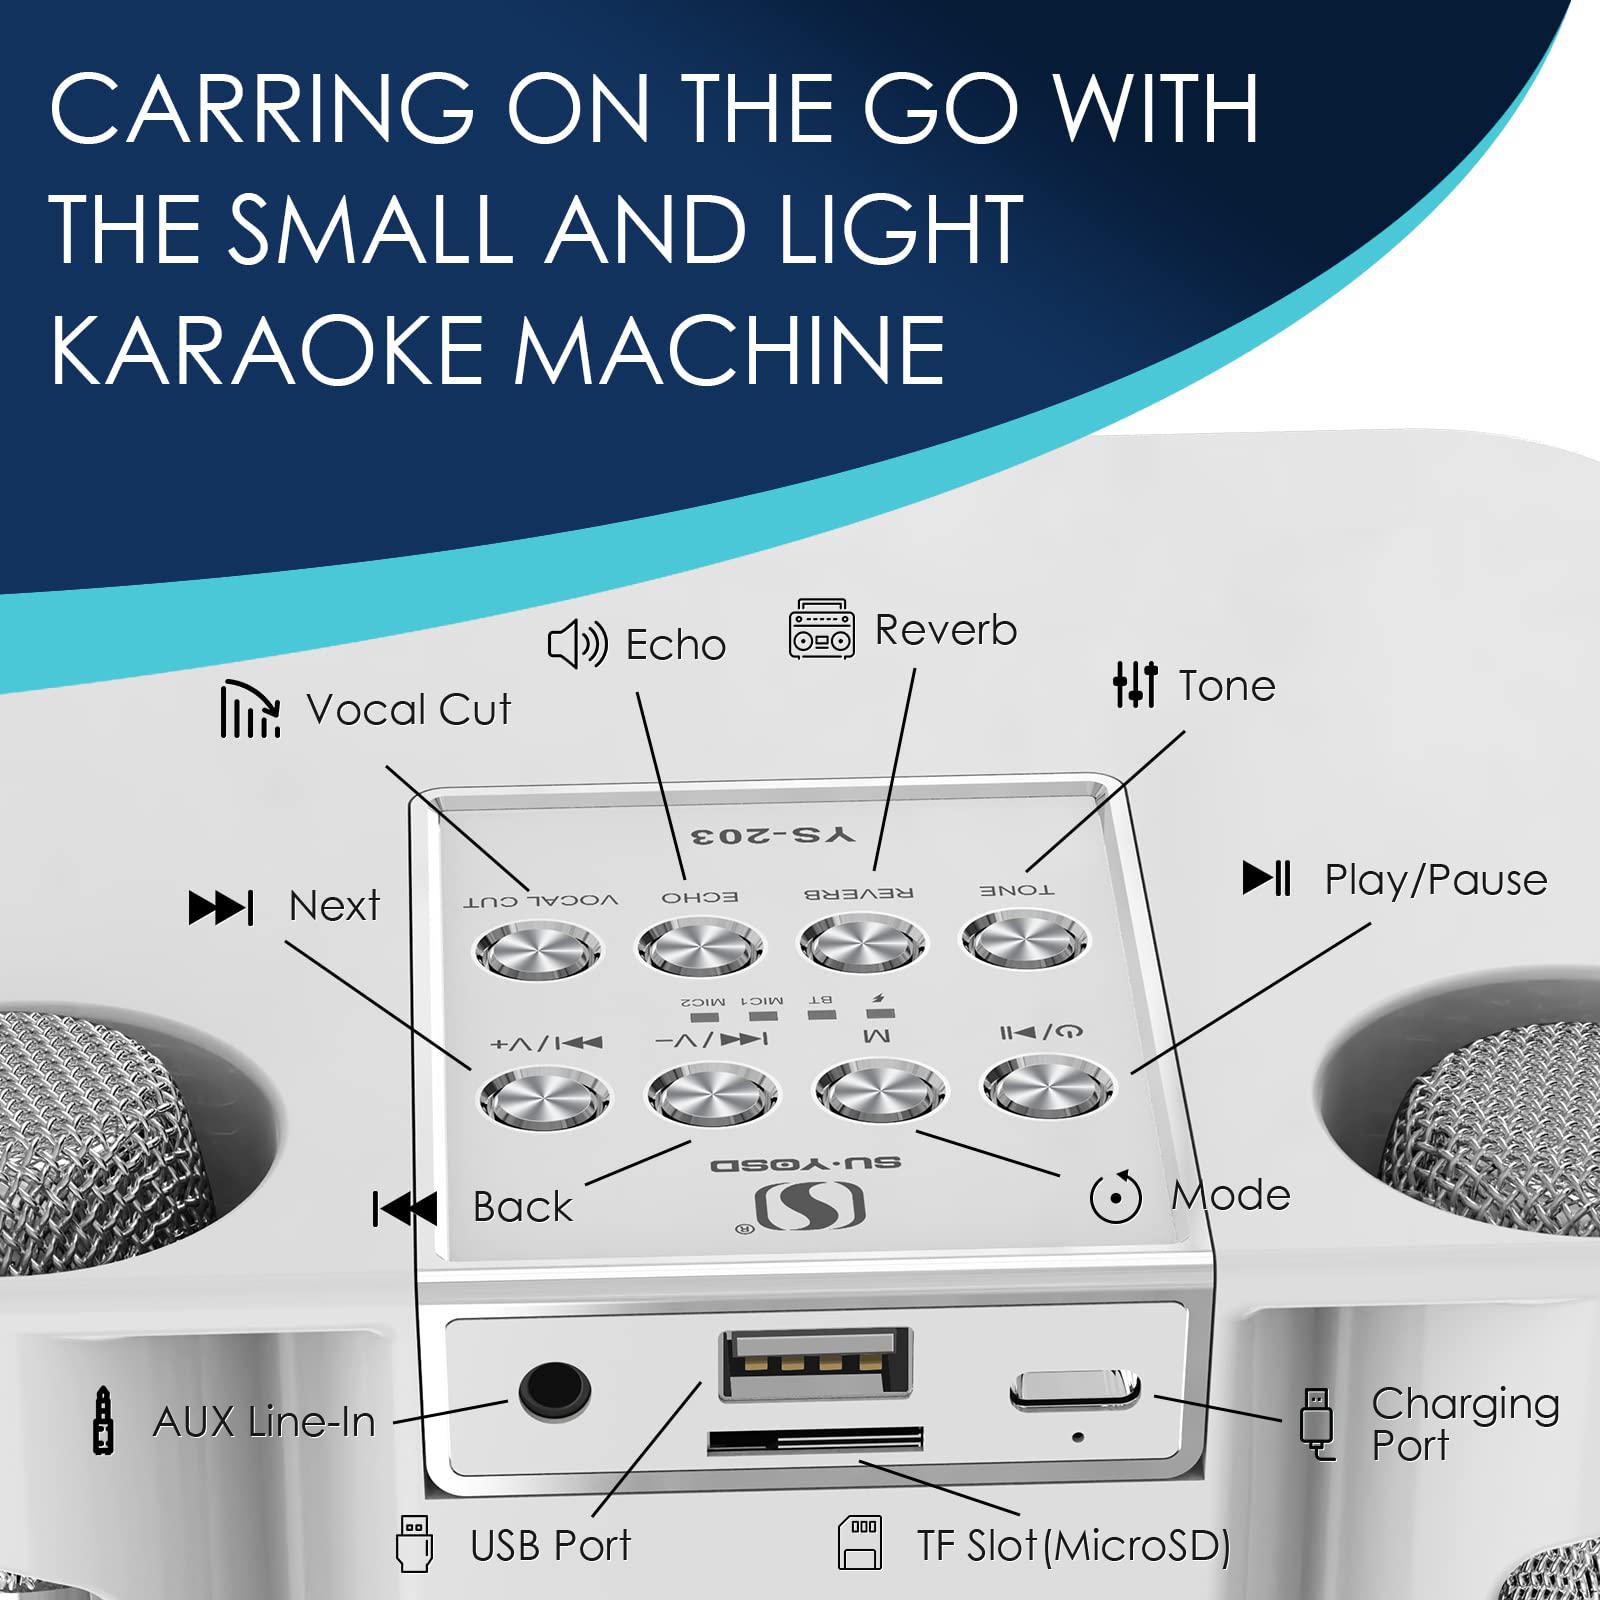 flyasny karaoke machine for adults and kids, portable bluetooth karaoke speaker with 2 wireless microphones for tv, singing k